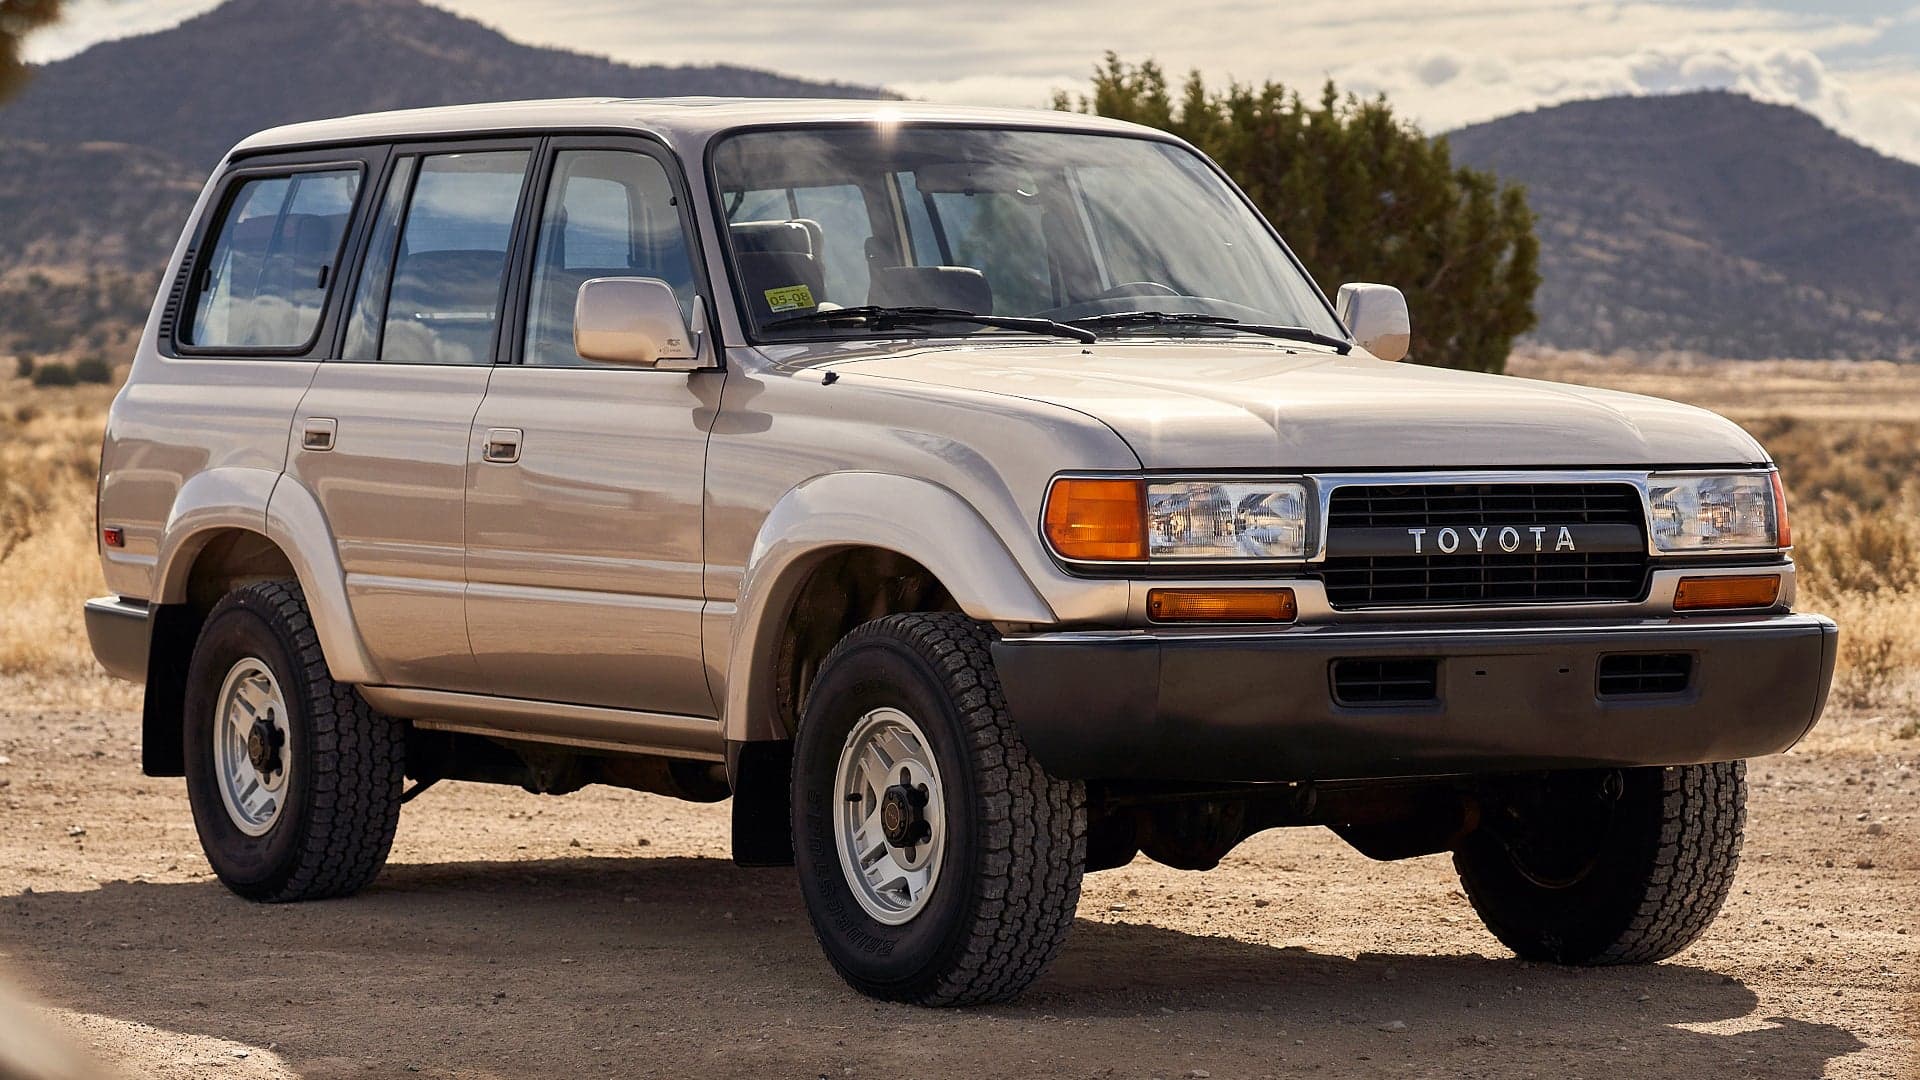 Toyota Used the ’90s Land Cruiser to Benchmark the 2022 Model